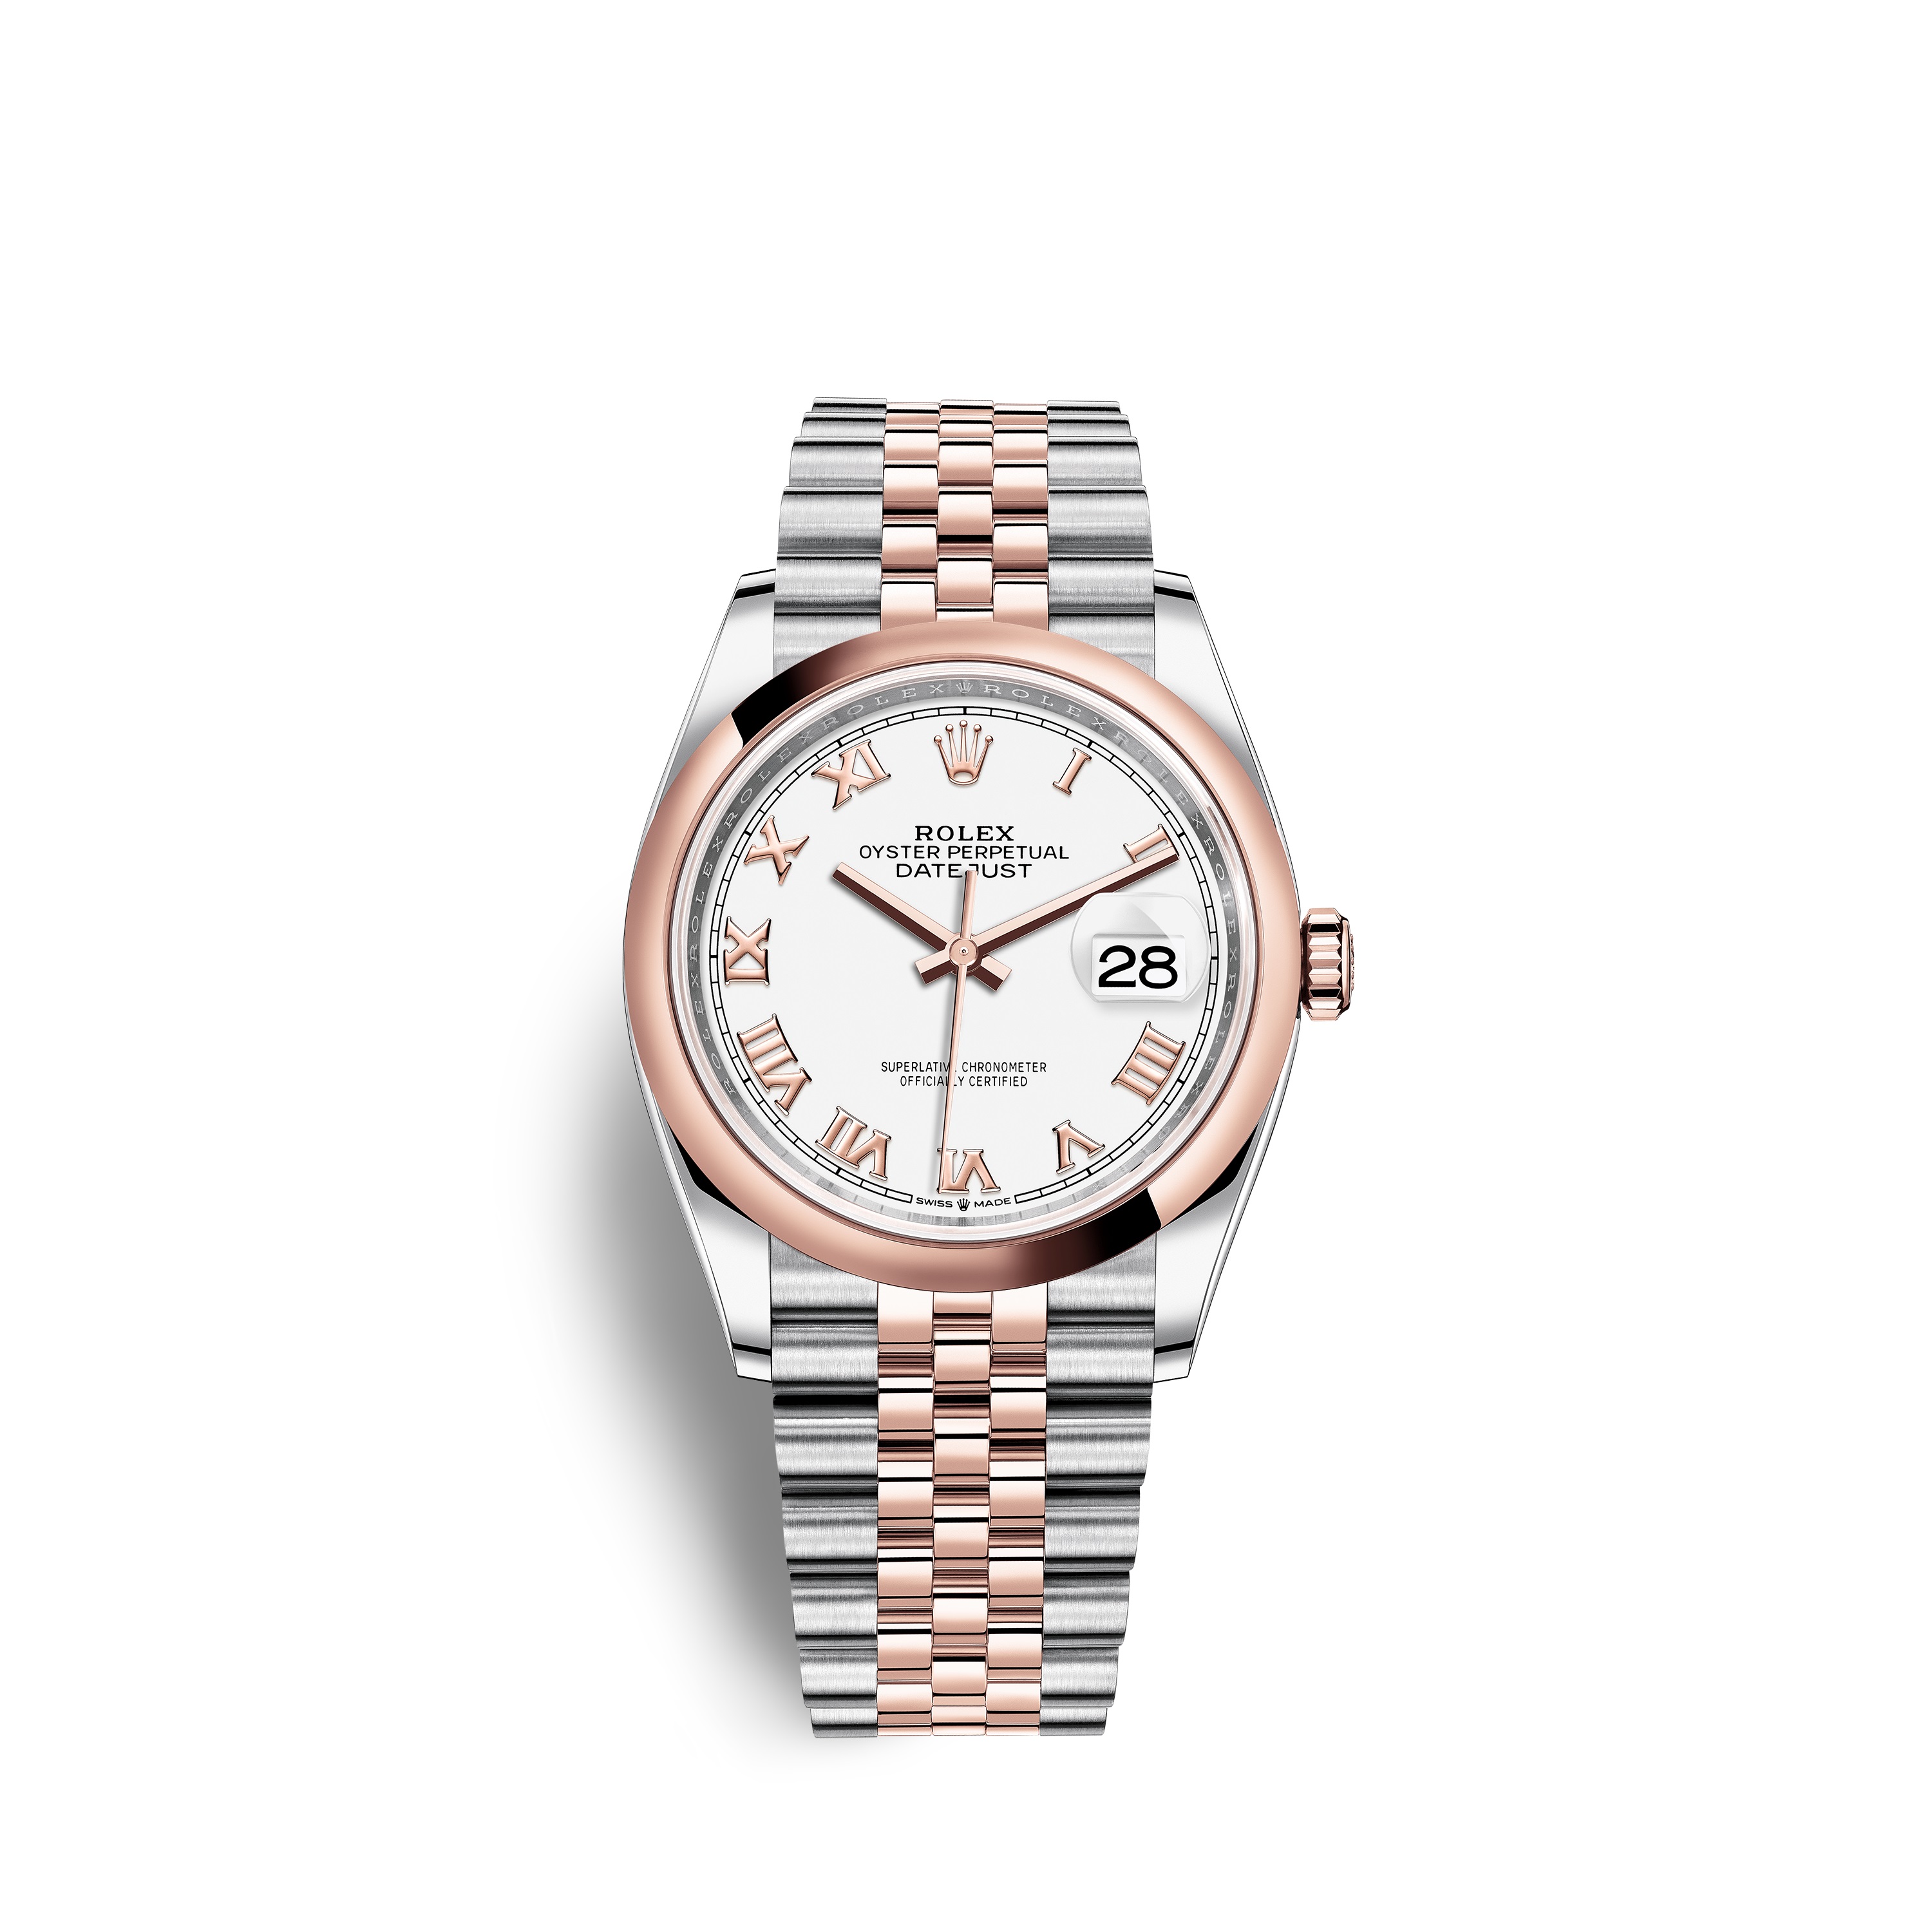 Datejust 36 126201 Rose Gold & Stainless Steel Watch (White)